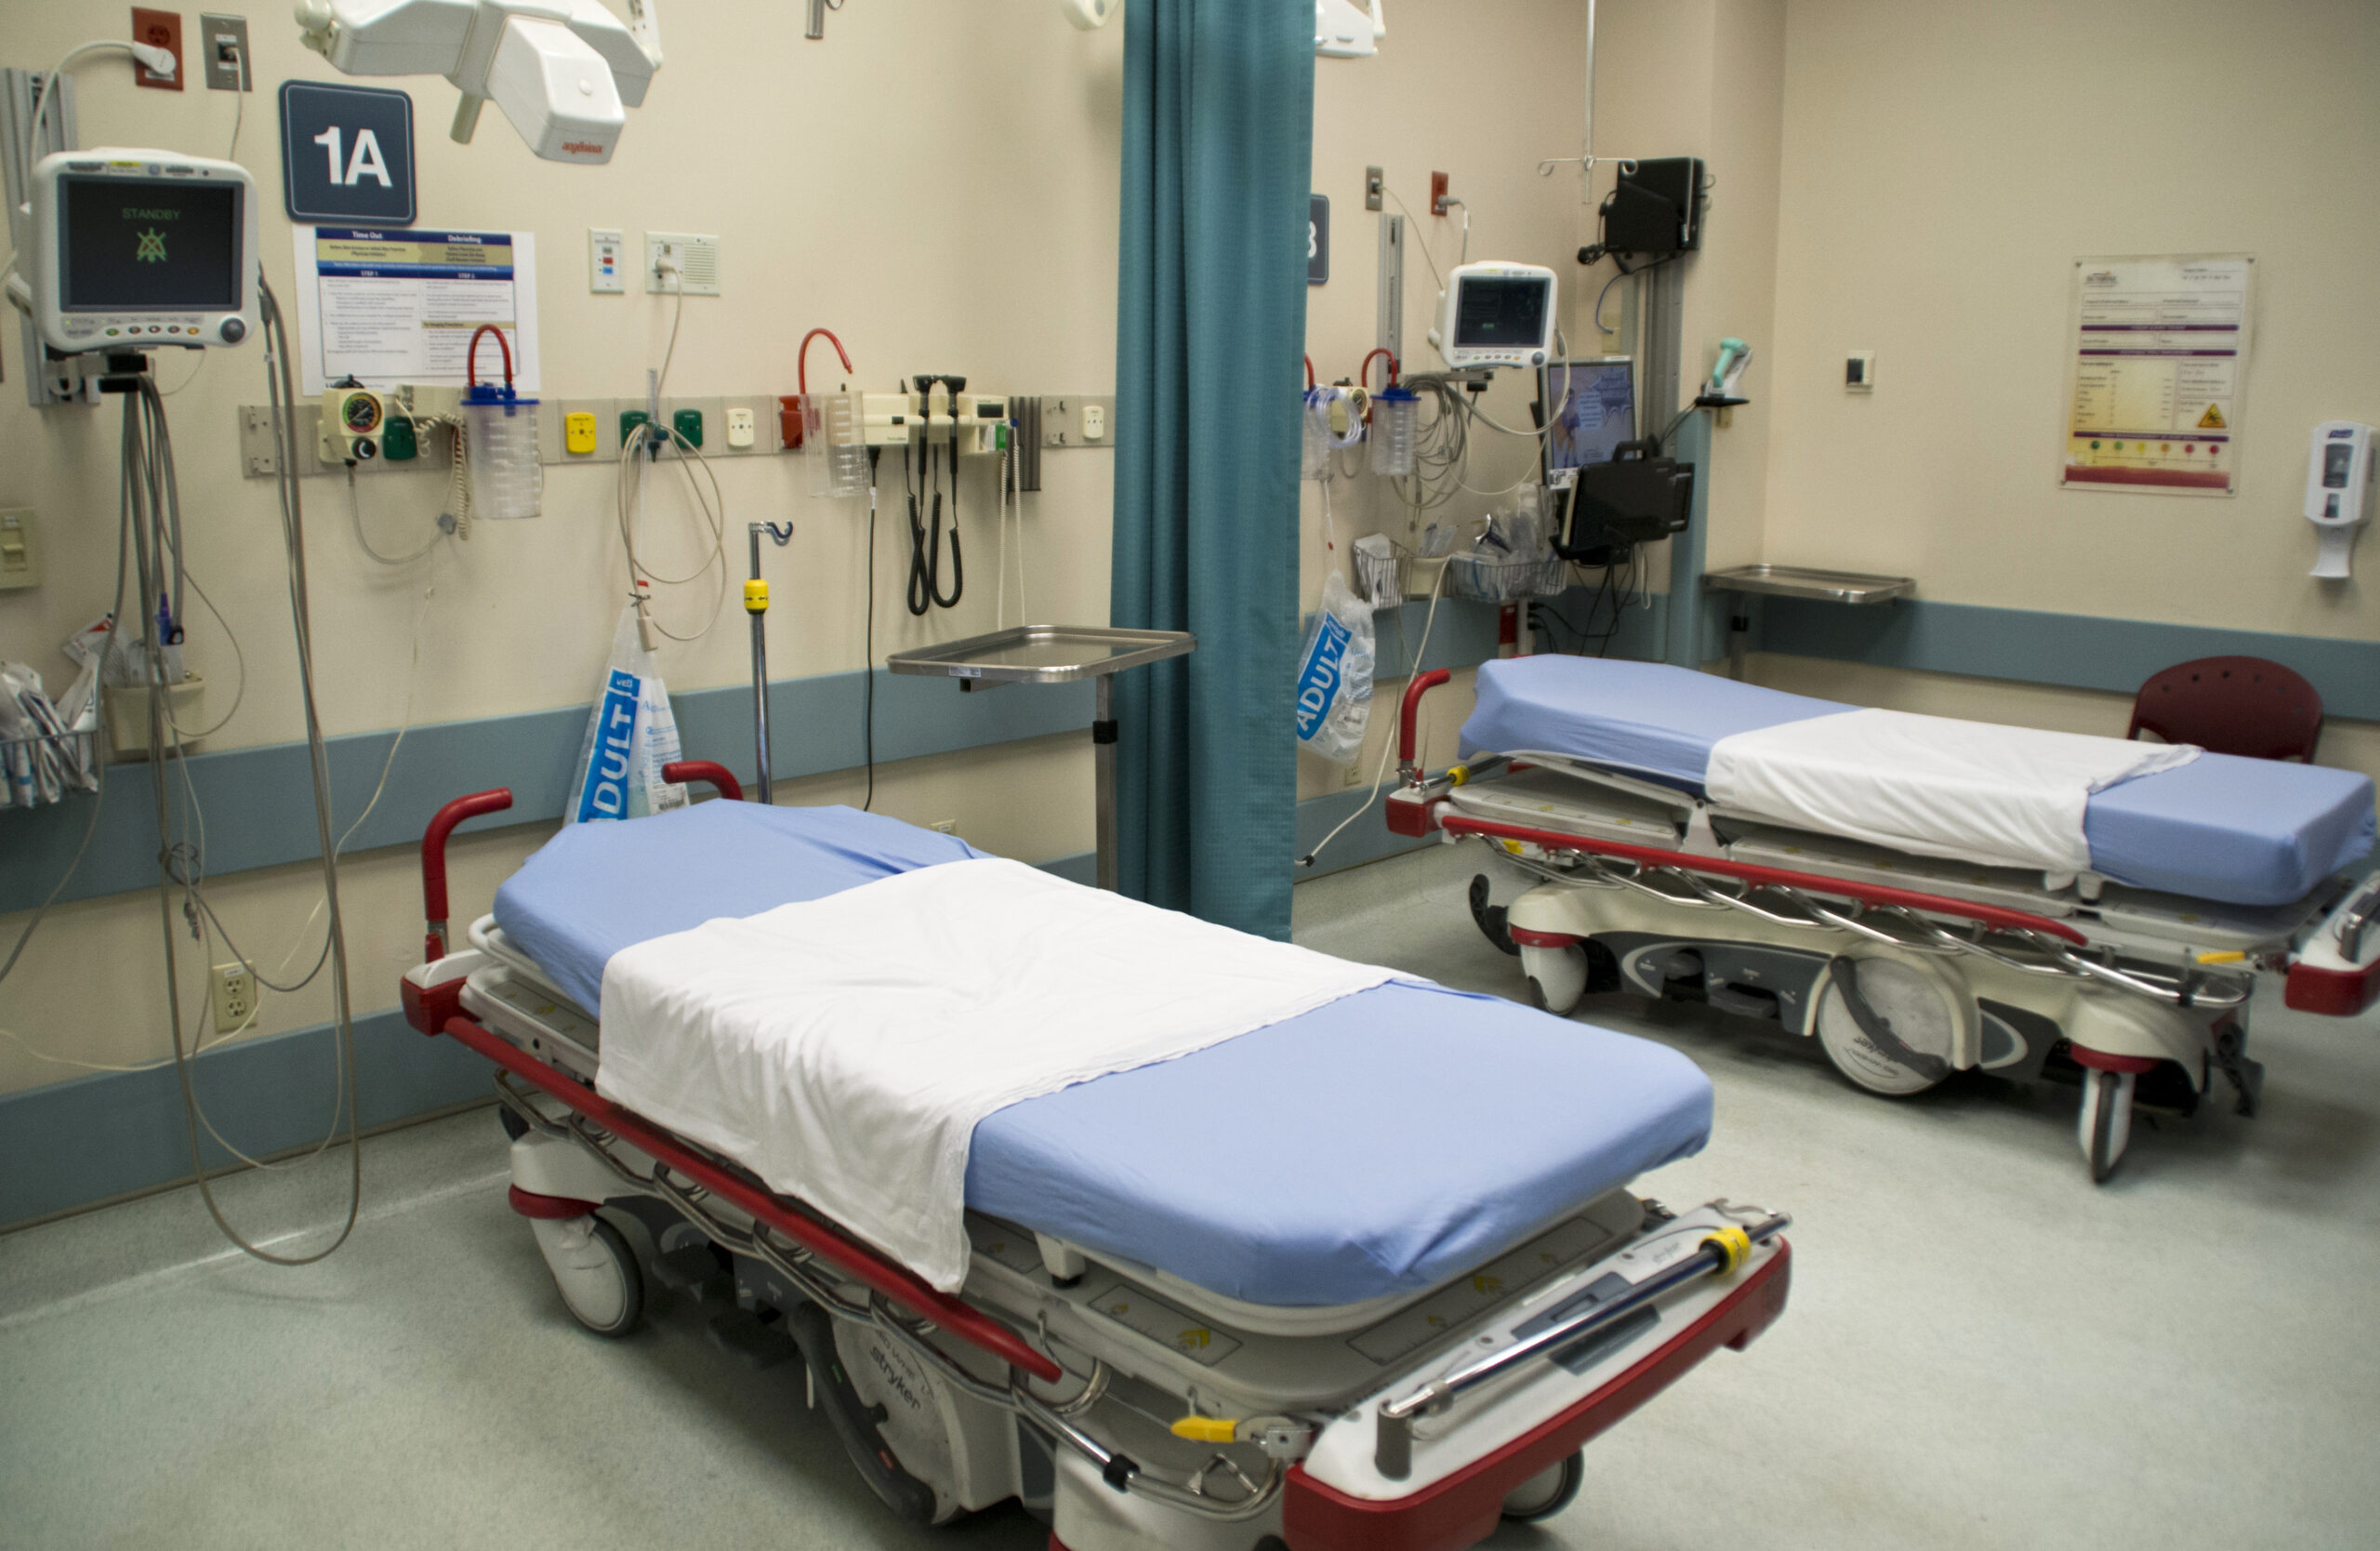 Two empty beds in an emergency room